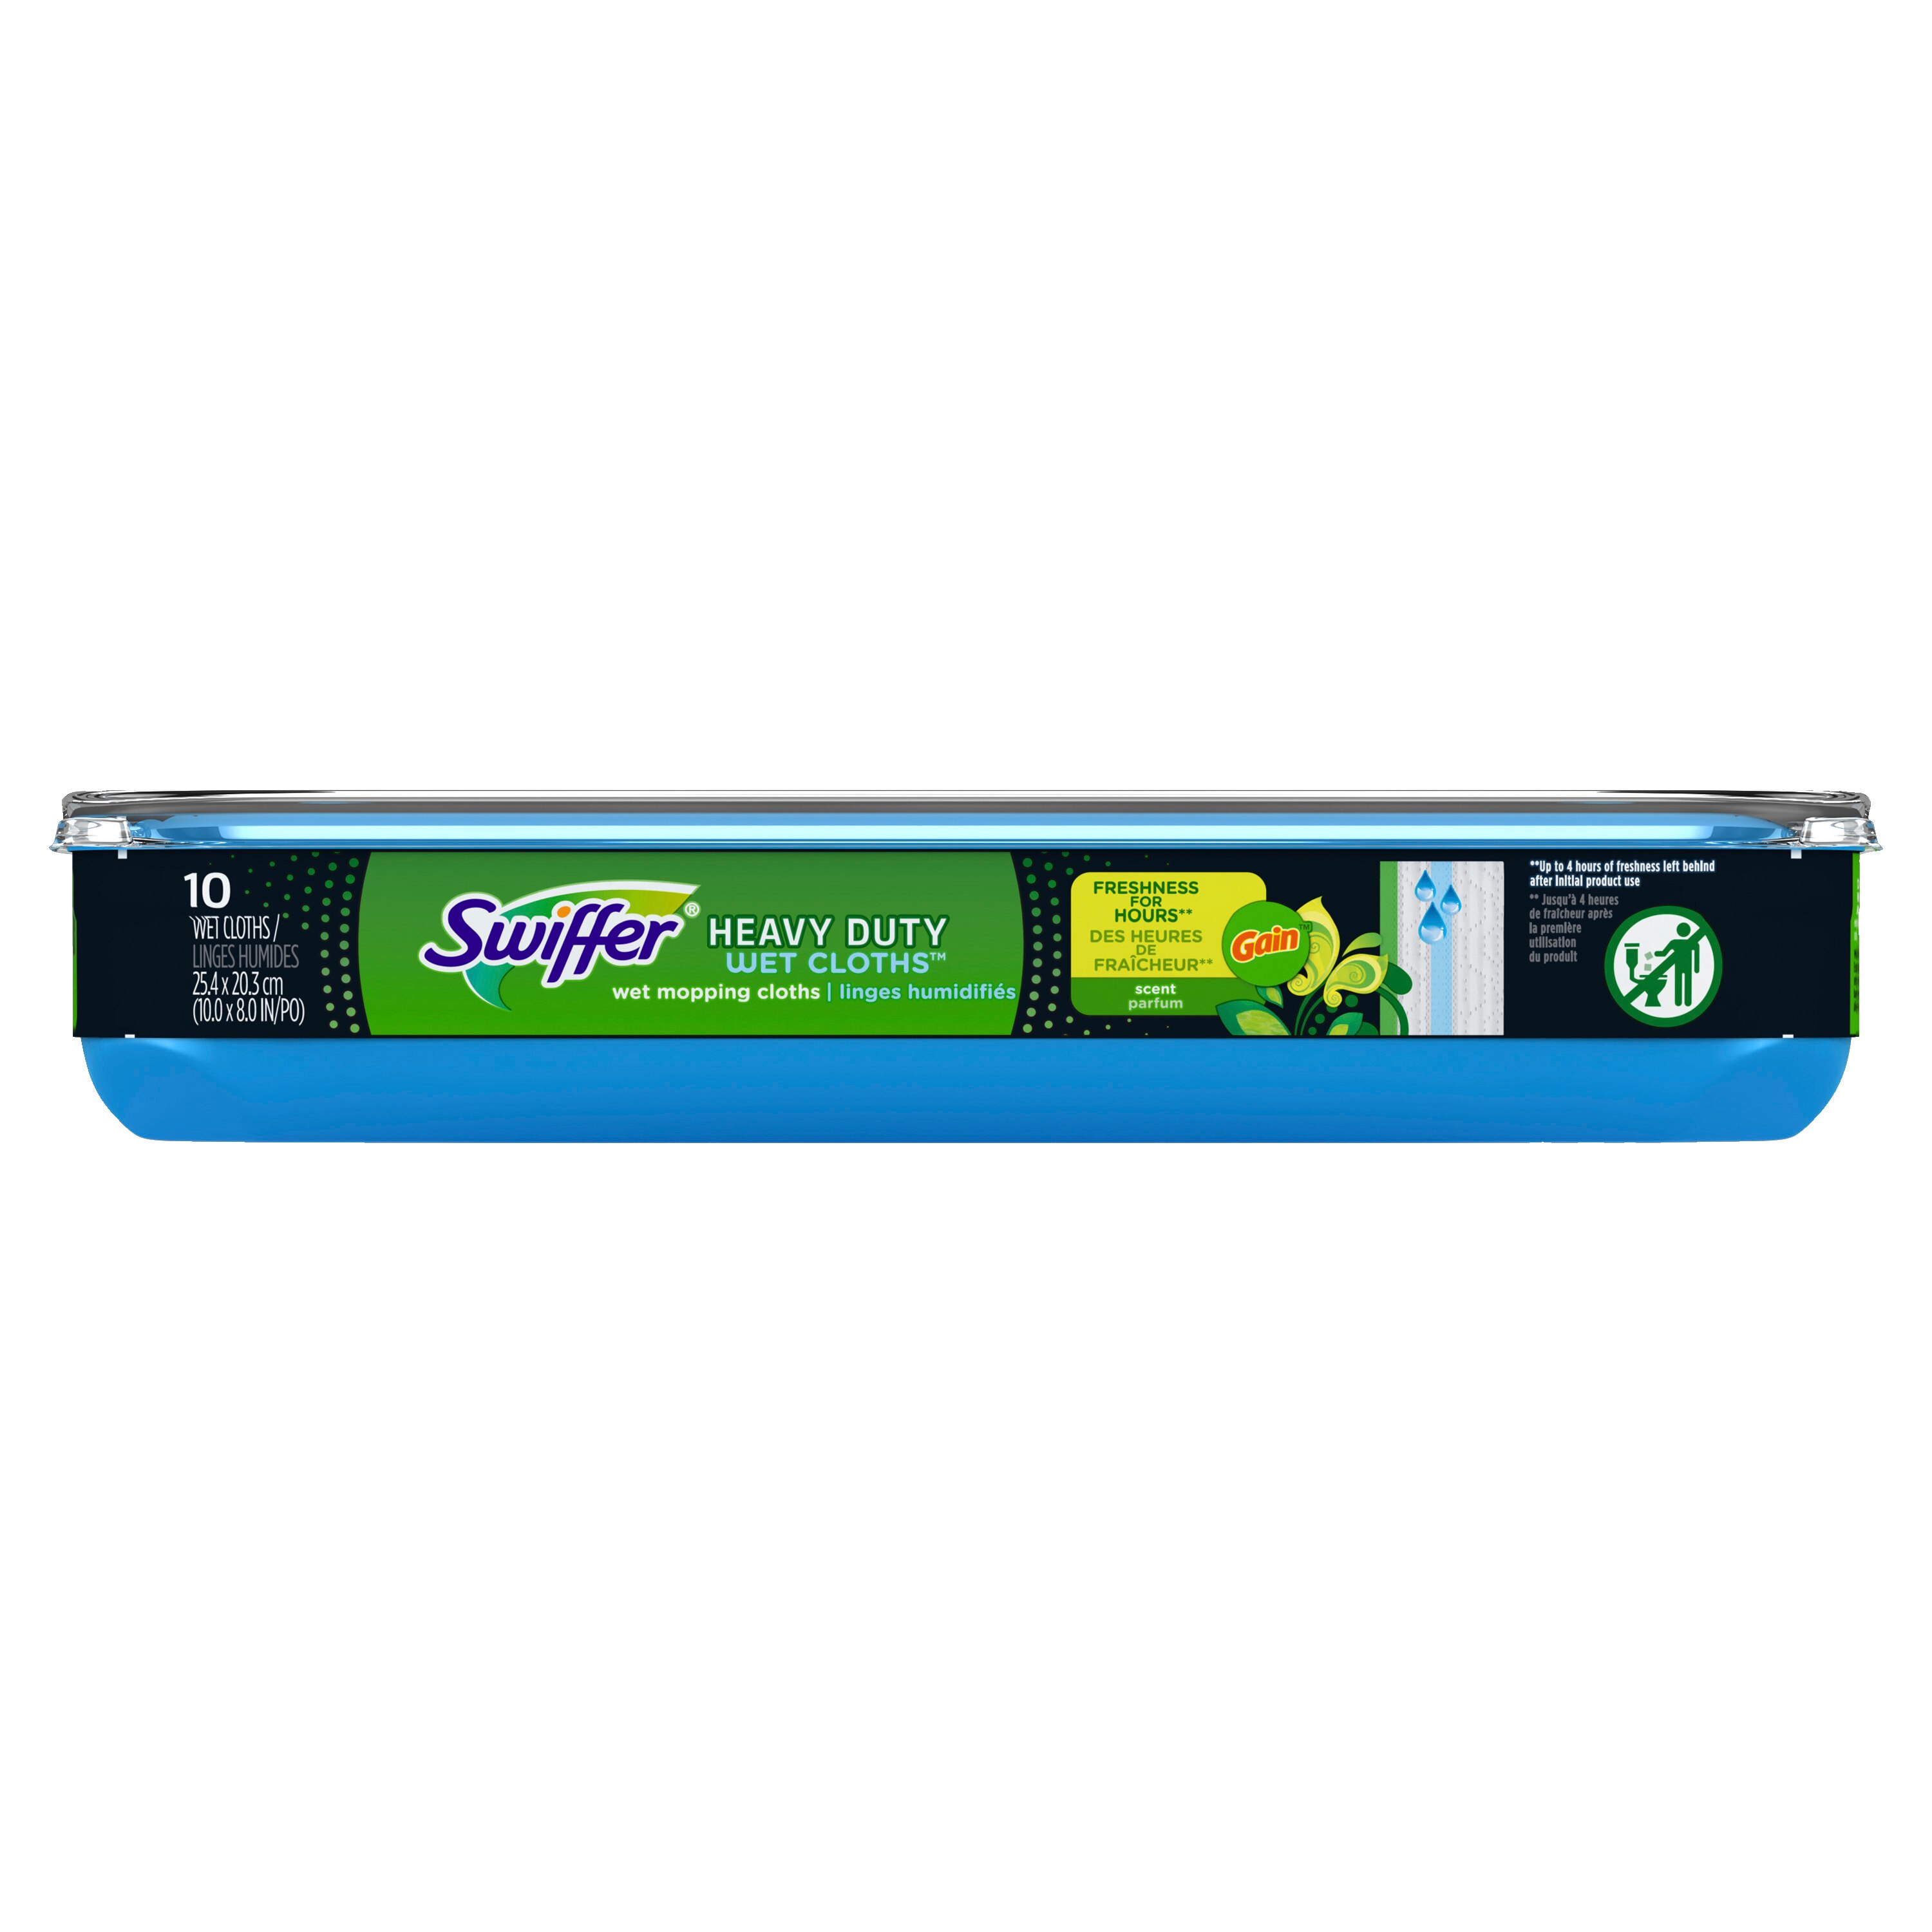 Swiffer Sweeper Heavy Duty Multi-Surface Wet Cloth Refills, for Floor Mopping and Cleaning,10 ct